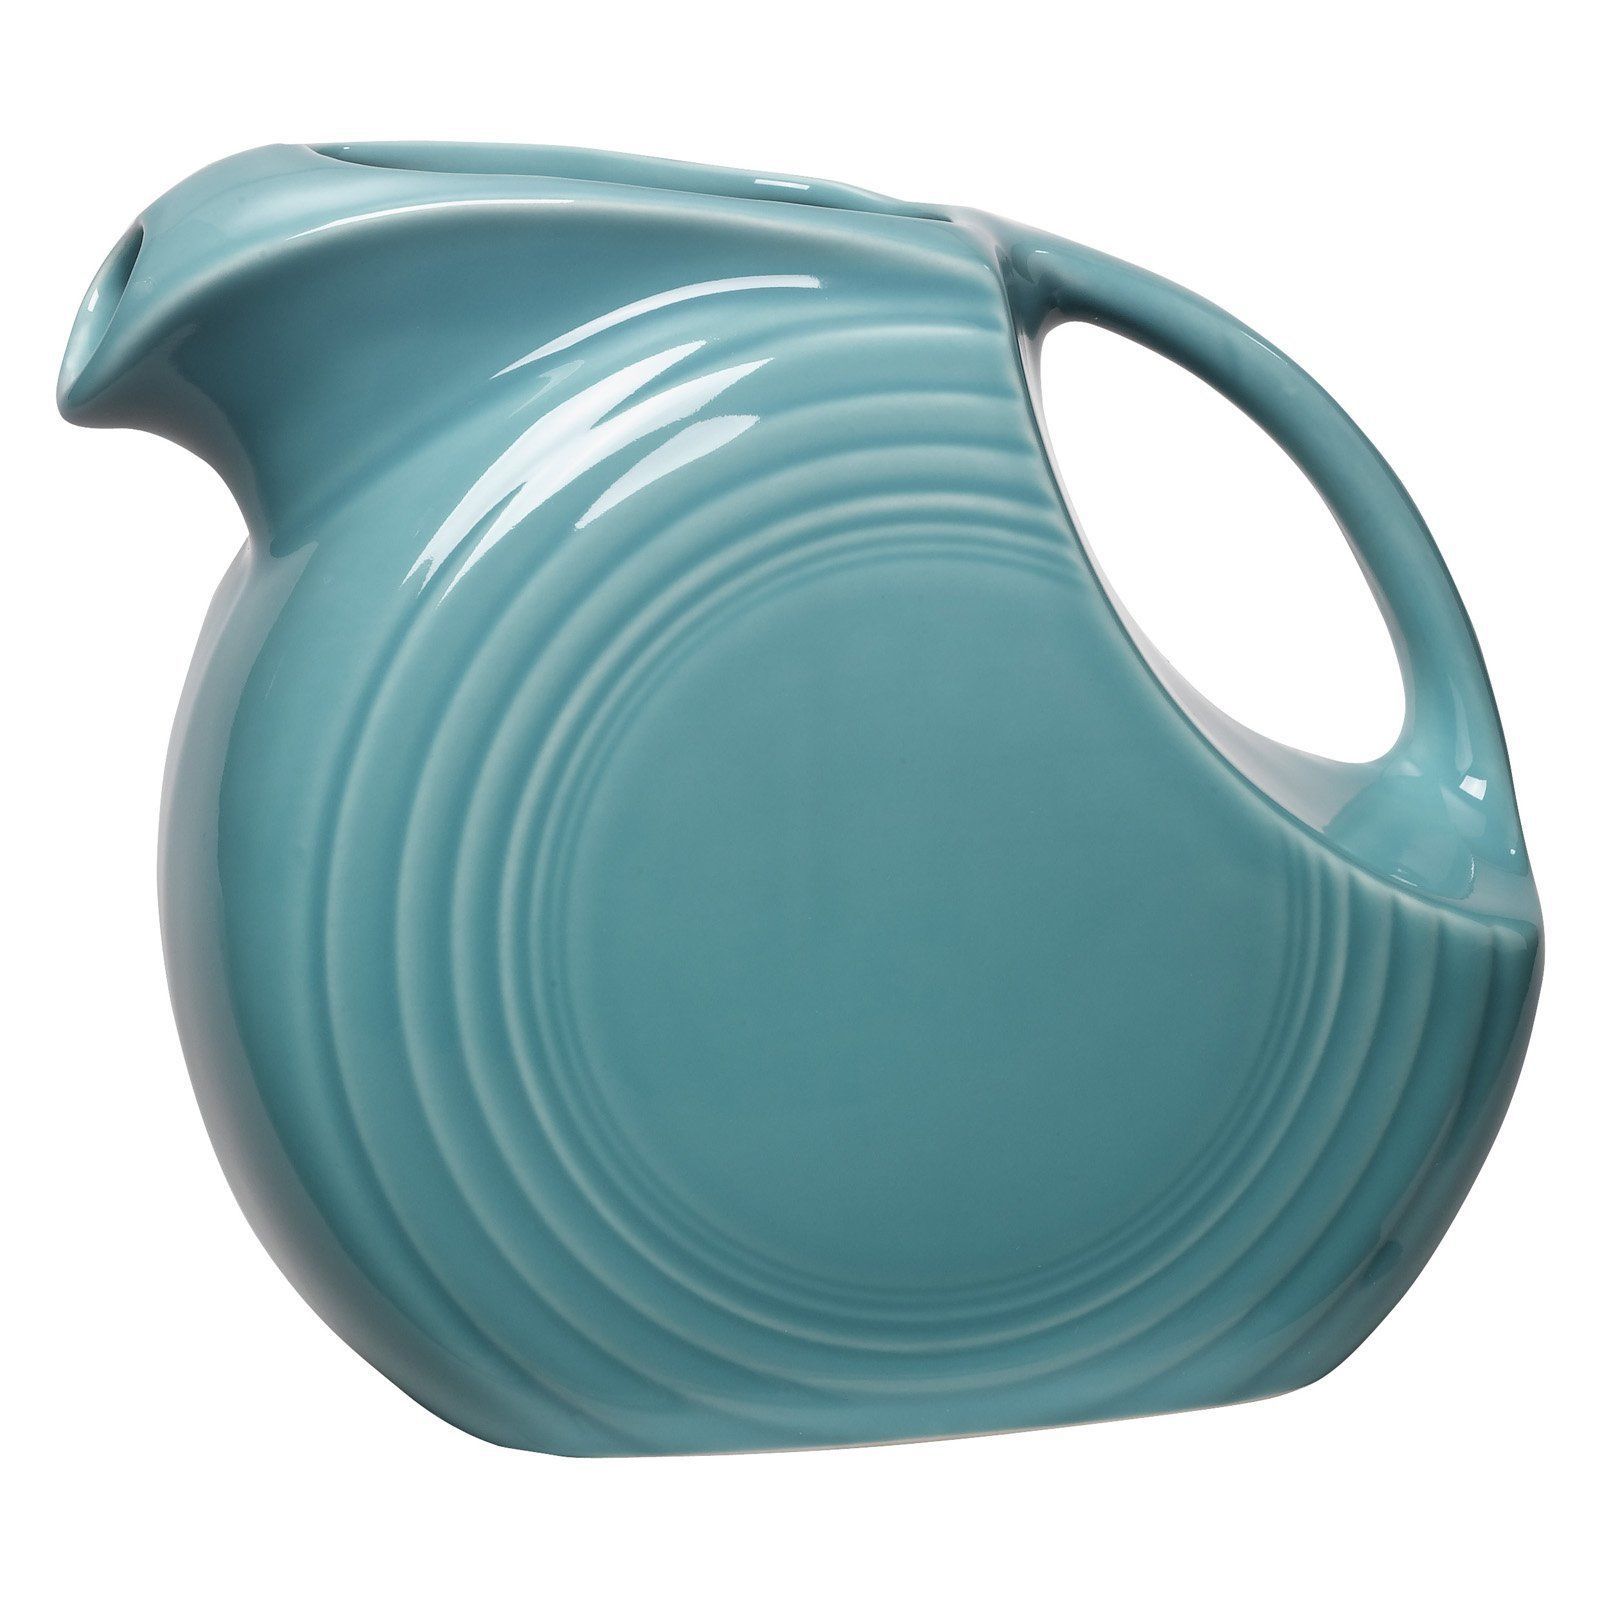  Fiesta Pitcher Large Blue Turquoise Disk Fiestaware 67 Disc Oz Ounce 8 Cups New - $64.37